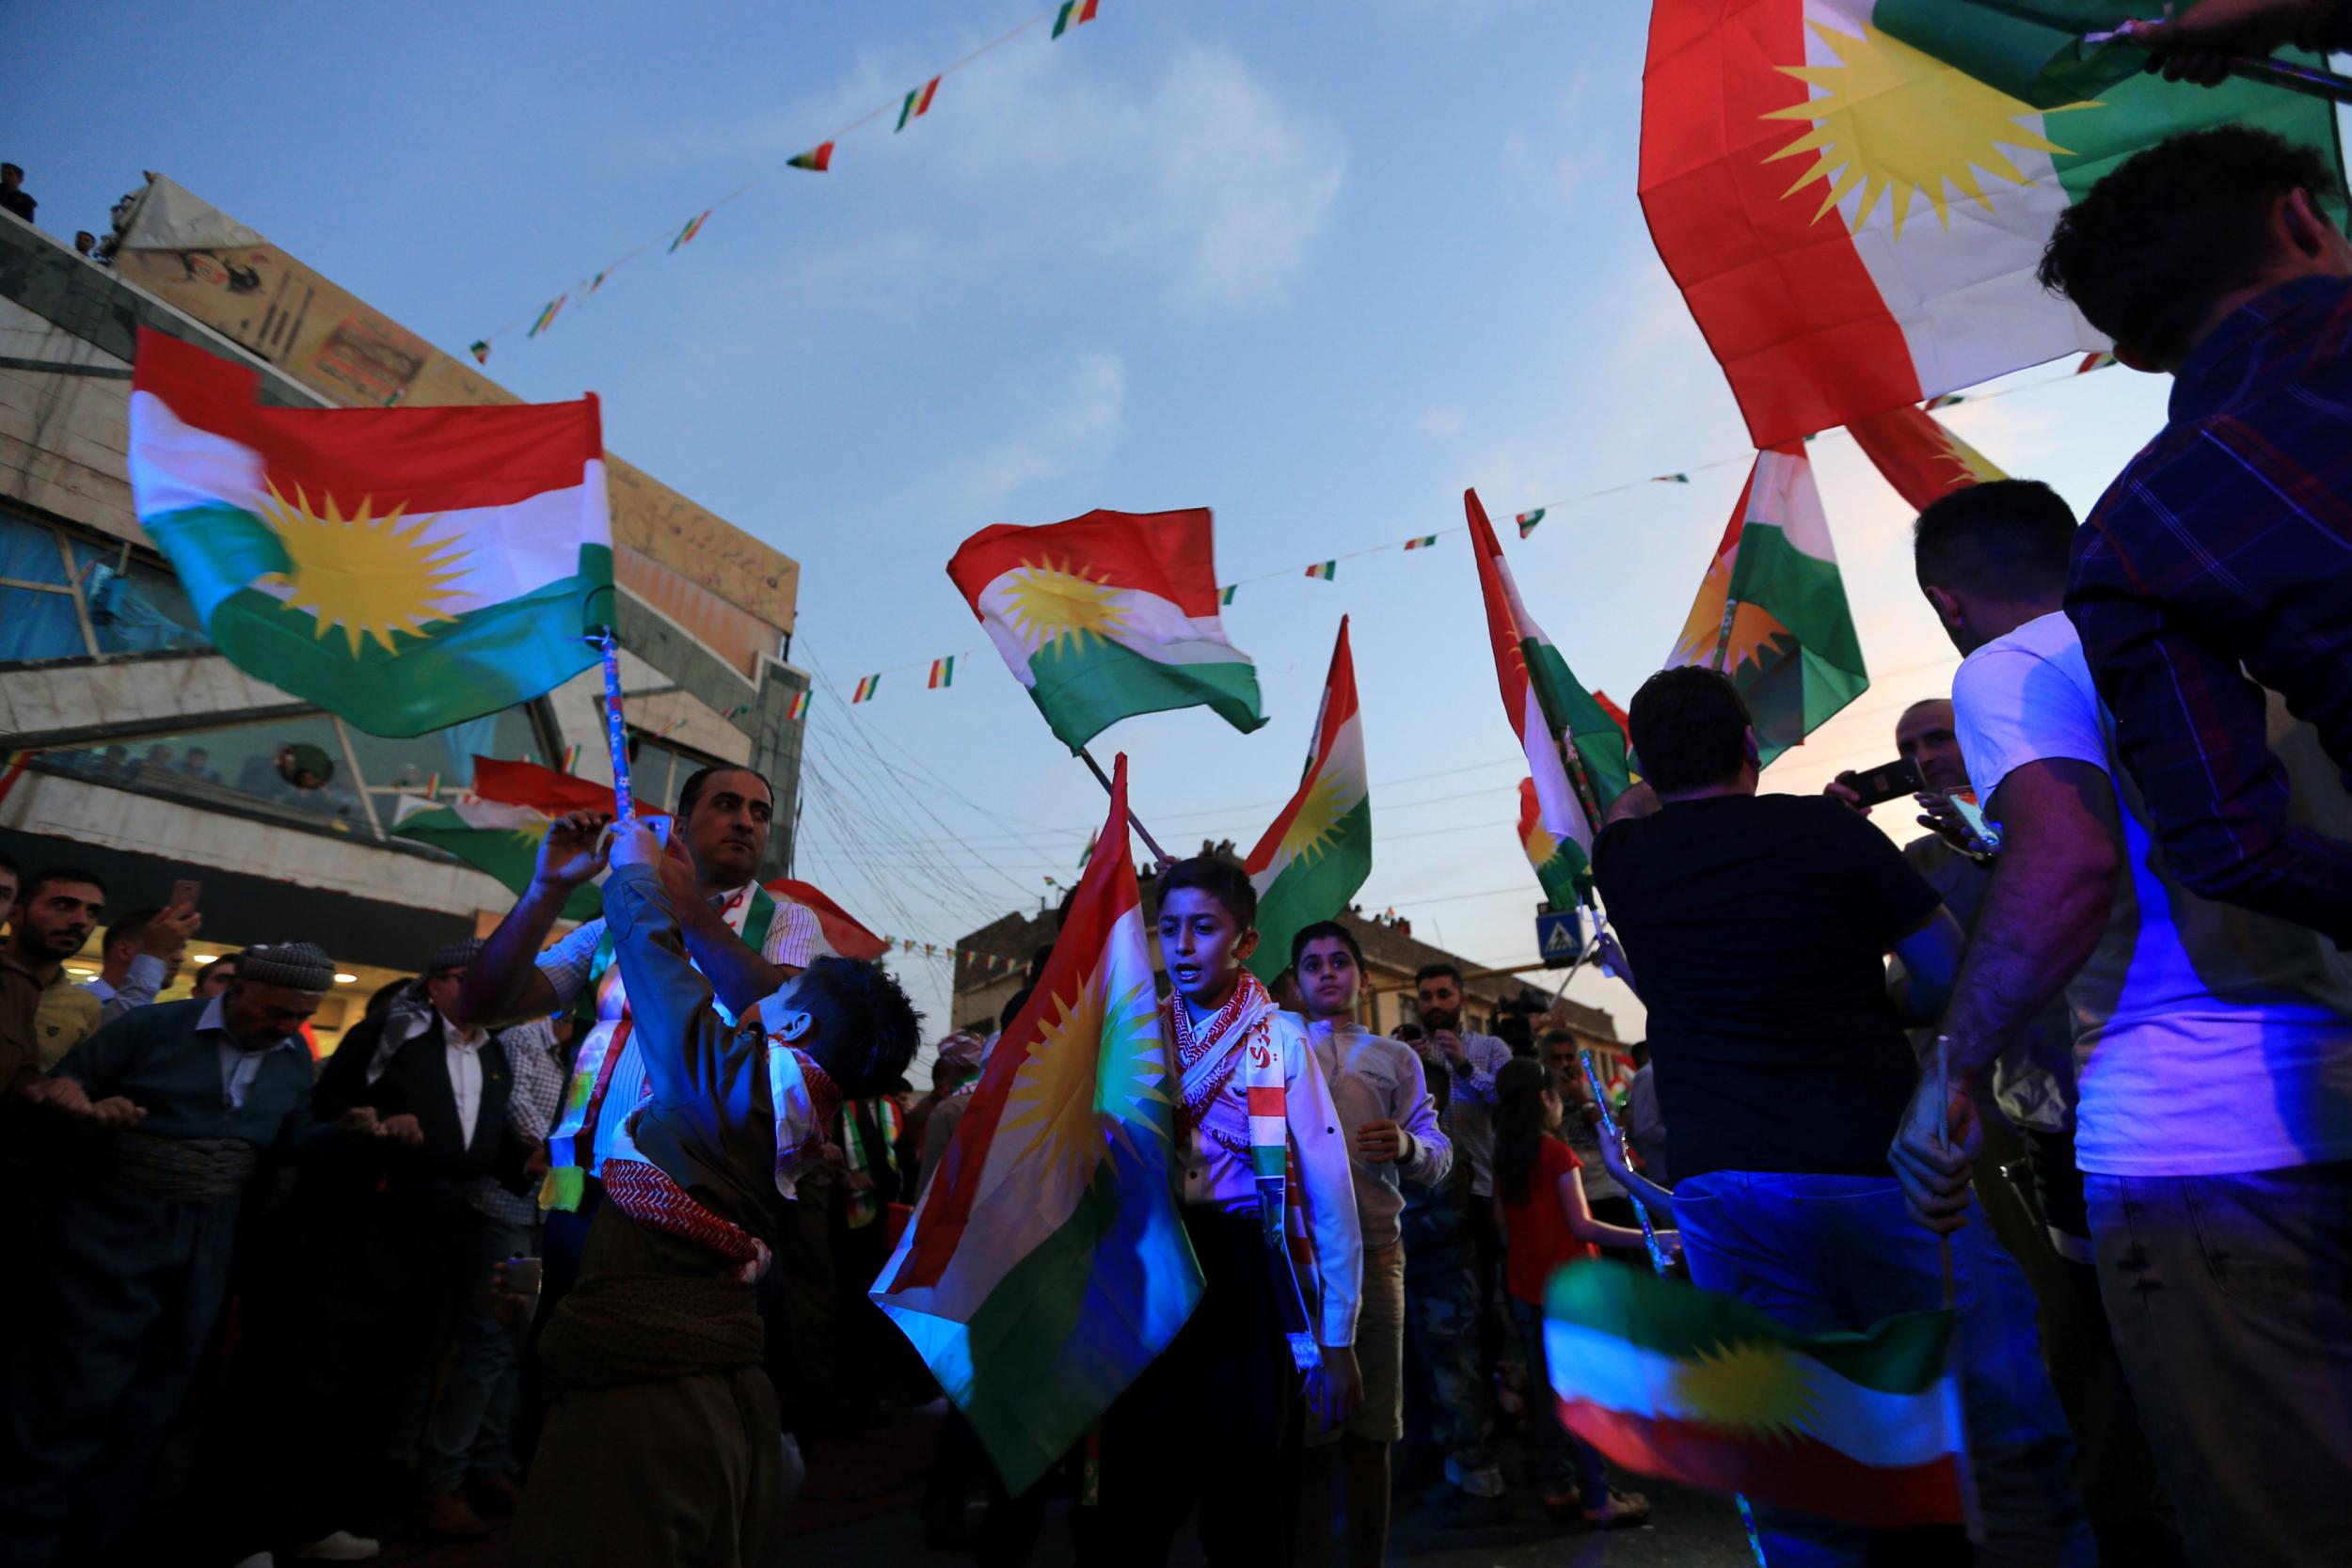 Kurds show their support for the independence referendum in Duhok, Iraq on 26 September 2017